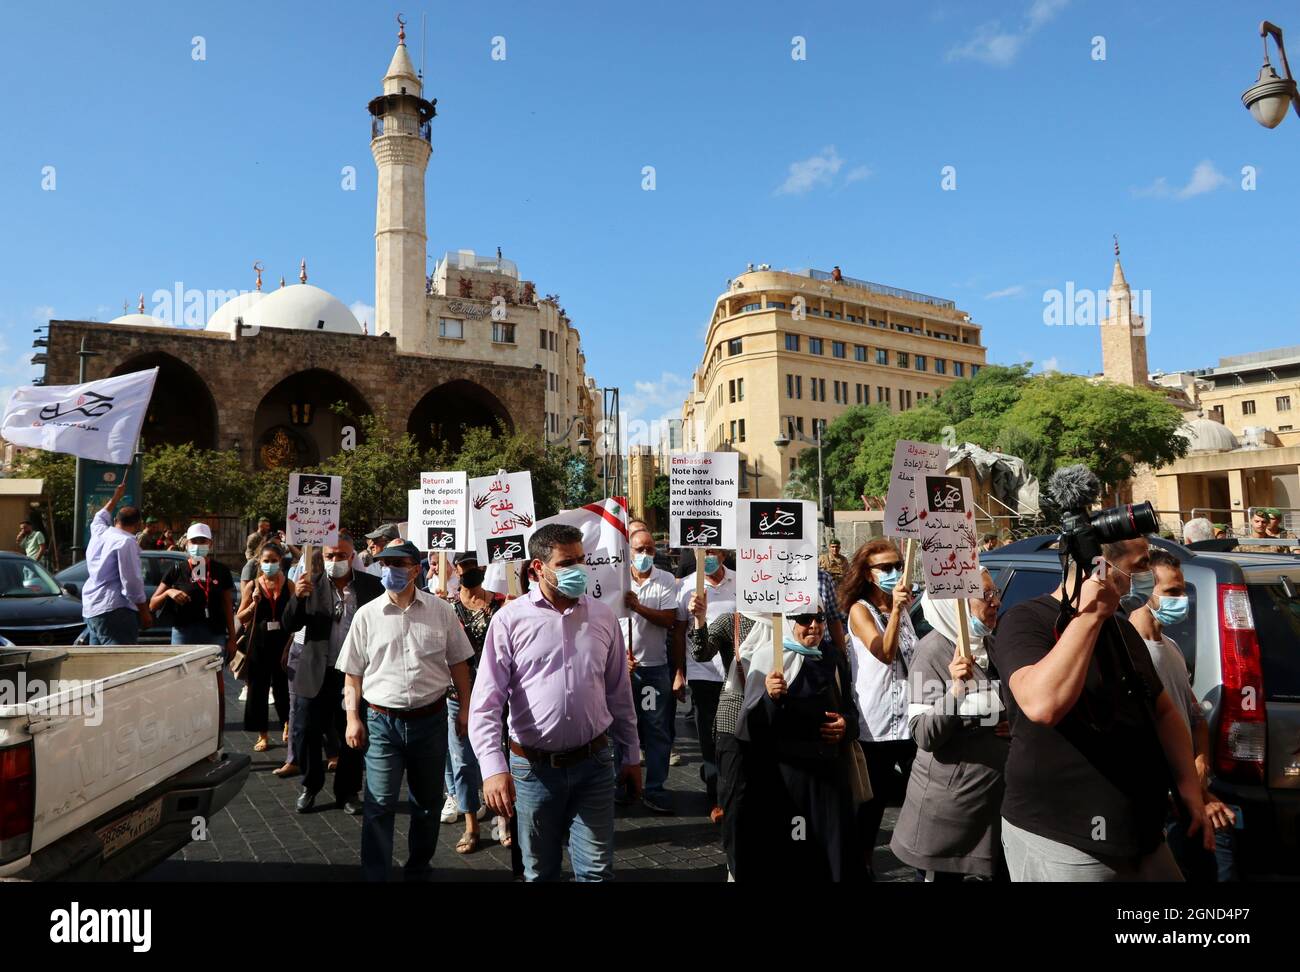 Beirut, Lebanon. 24th Sep, 2021. Depositors march towards banks, Beirut, Lebanon, on September 24, 2021. According to Bloomberg, Lebanon's annual rate of inflation has risen to the highest of all countries tracked, surpassing Zimbabwe and Venezuela. Depositors accuse Lebanese banks of making their money desappear abroad. (Photo by Elisa Gestri/Sipa USA) Credit: Sipa USA/Alamy Live News Stock Photo